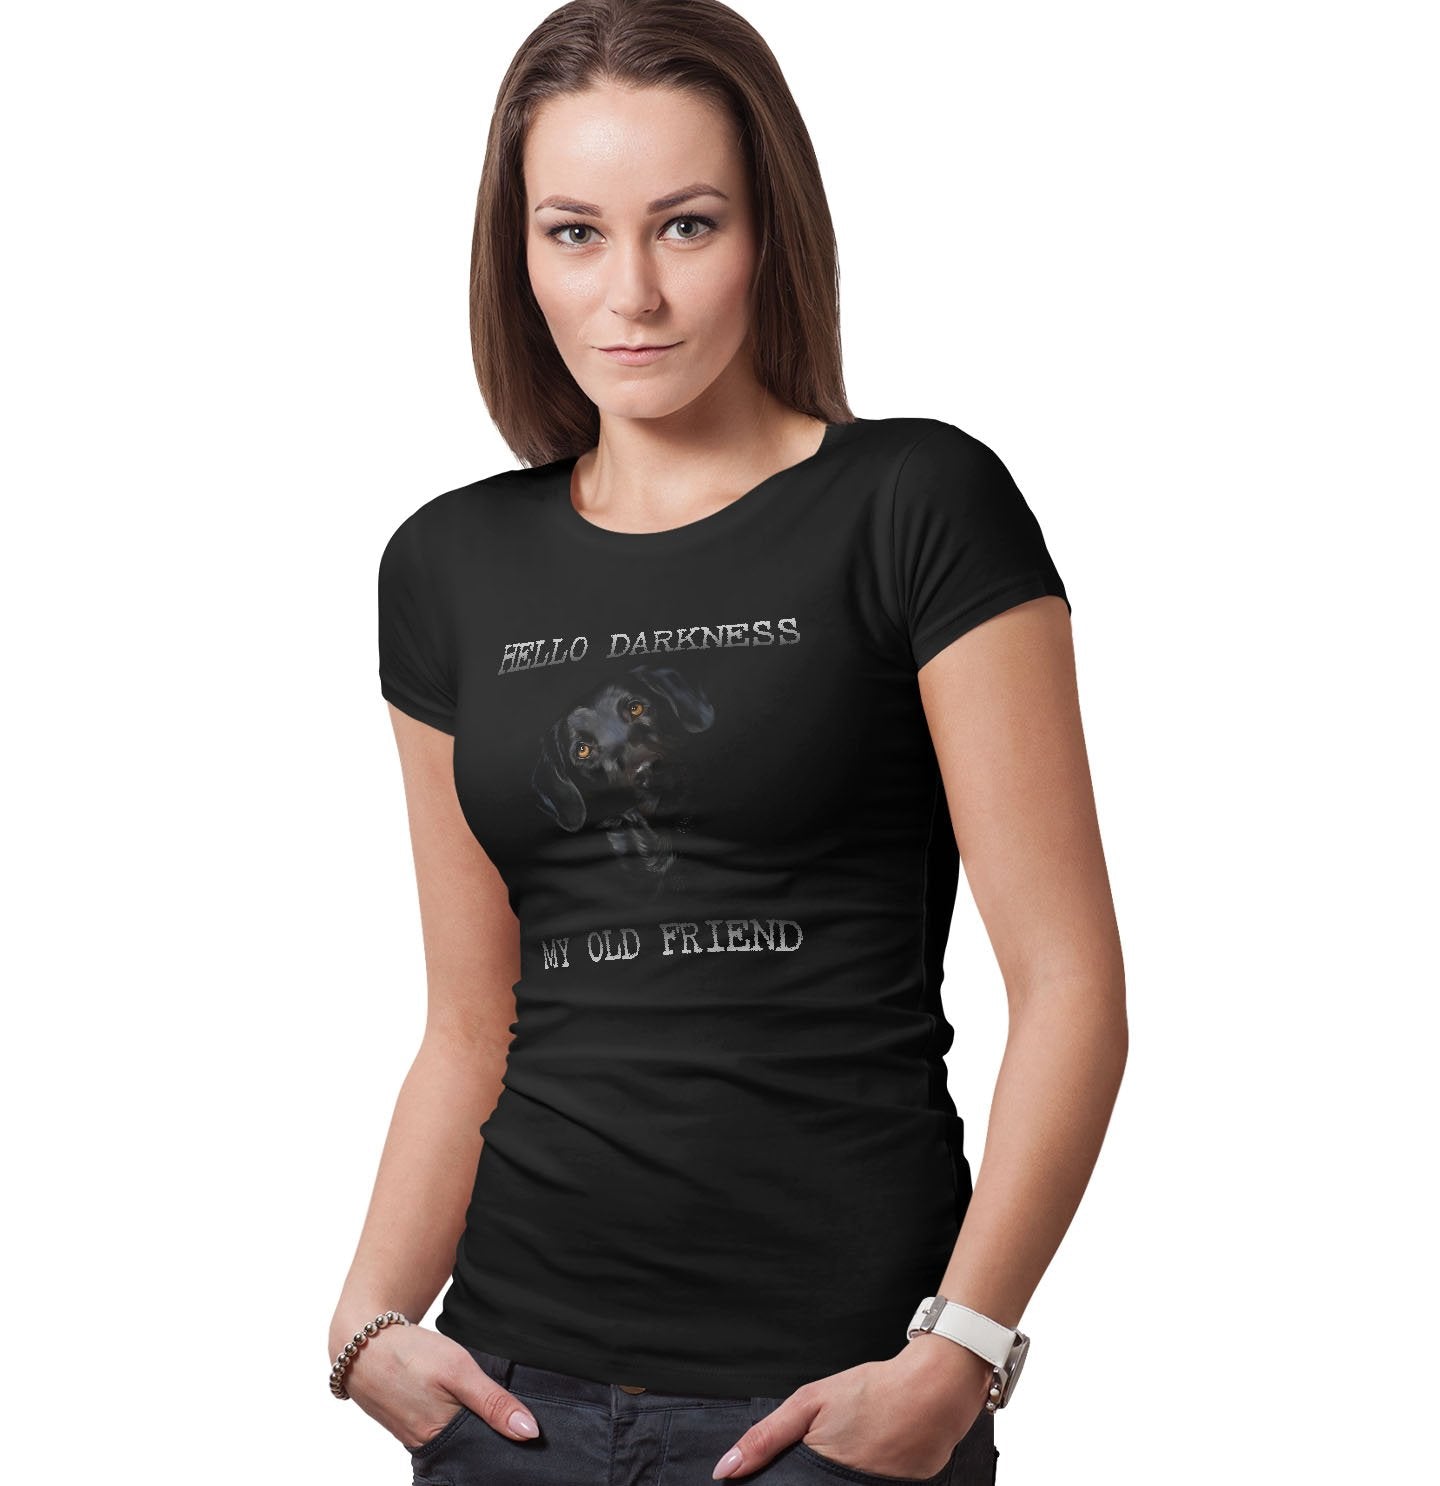 Hello Darkness My Old Friend - Black Lab - Women's Fitted T-Shirt